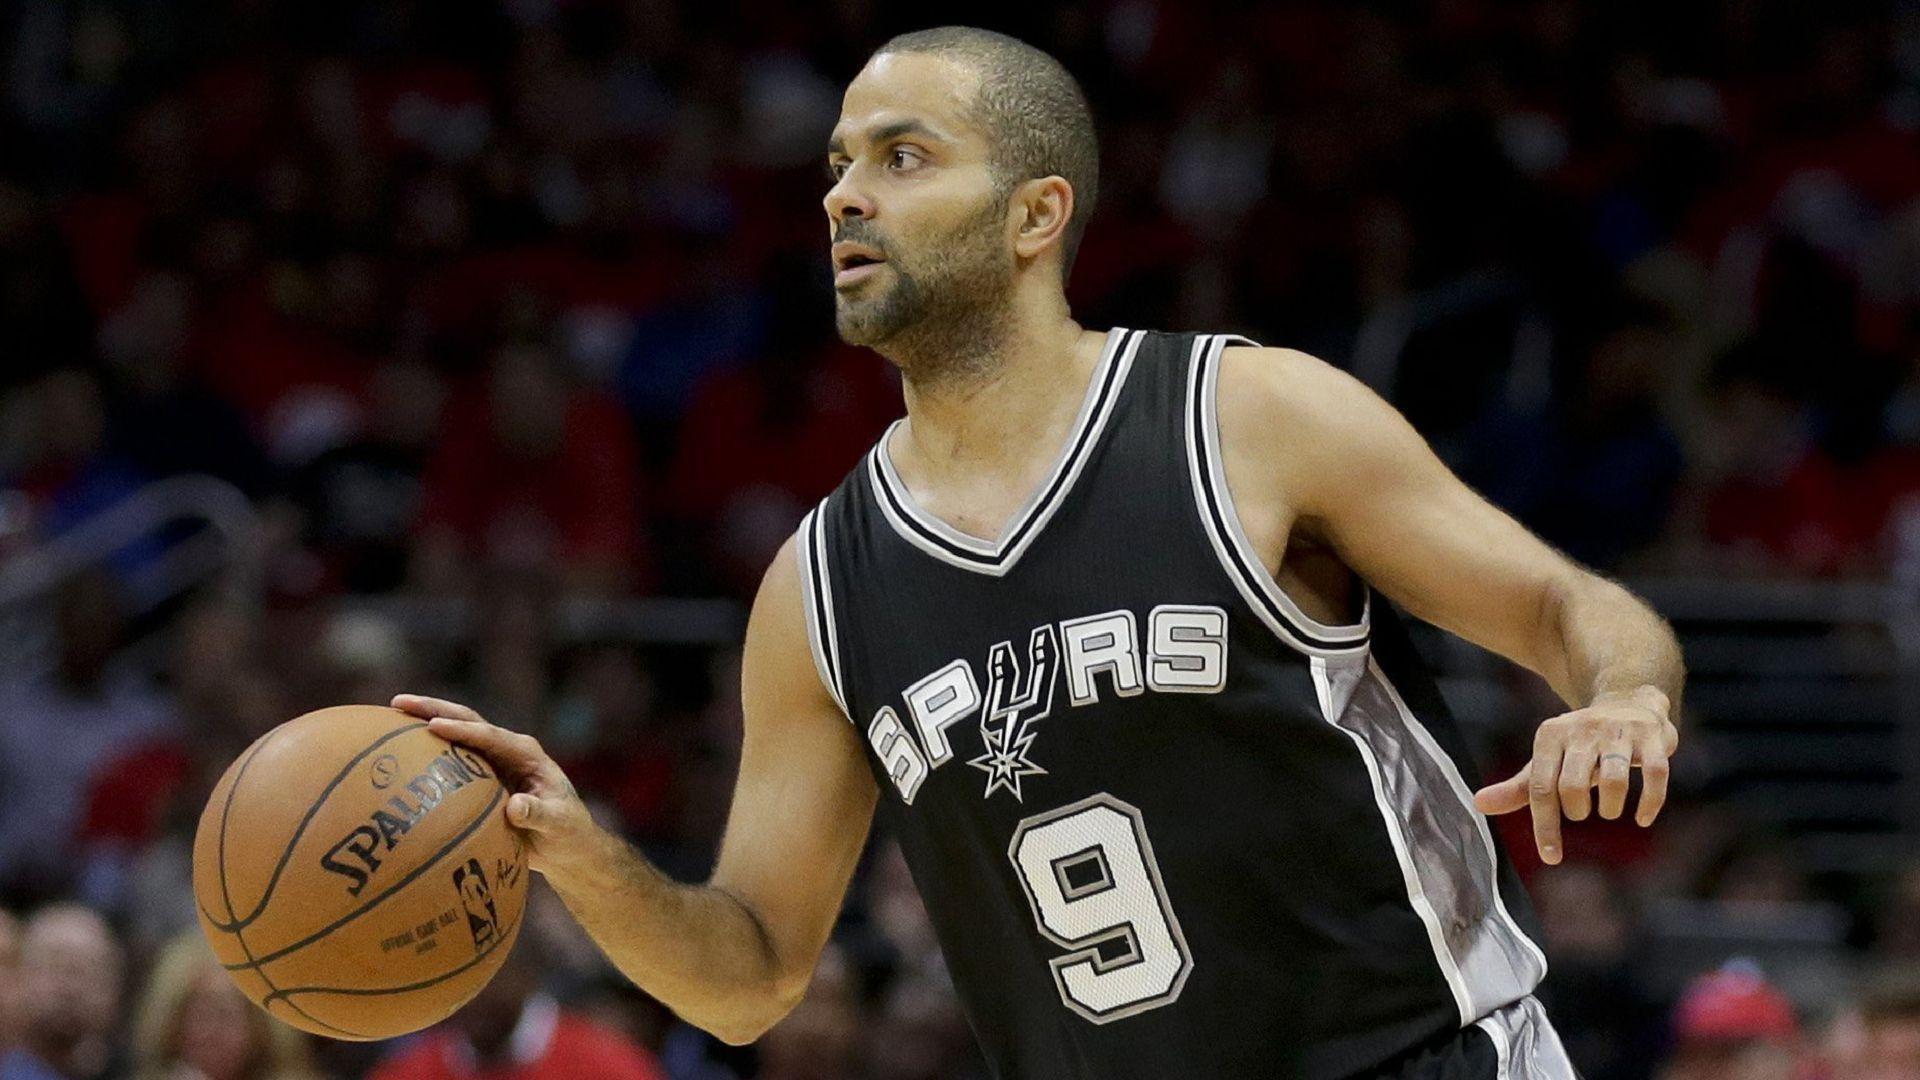 Tony Parker Wallpaper Image Photo Picture Background